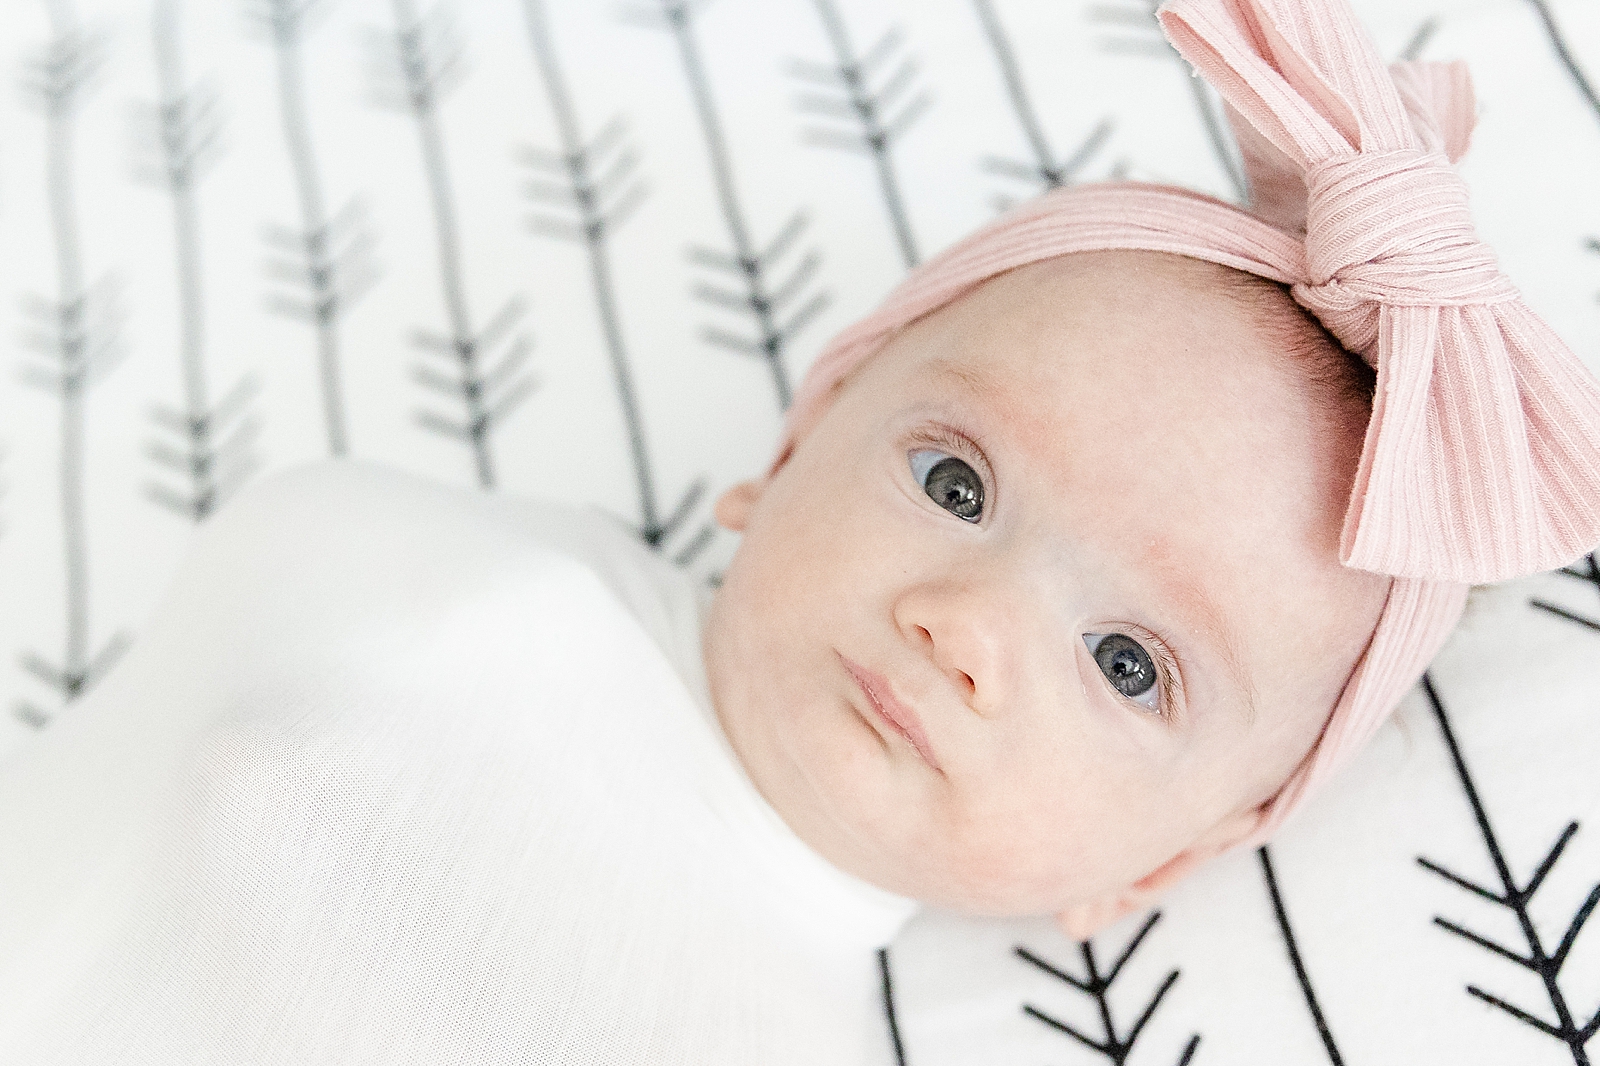 Lifestyle Newborn Photos baby in crib swaddles with big pink bow eyes open looking directly at camera